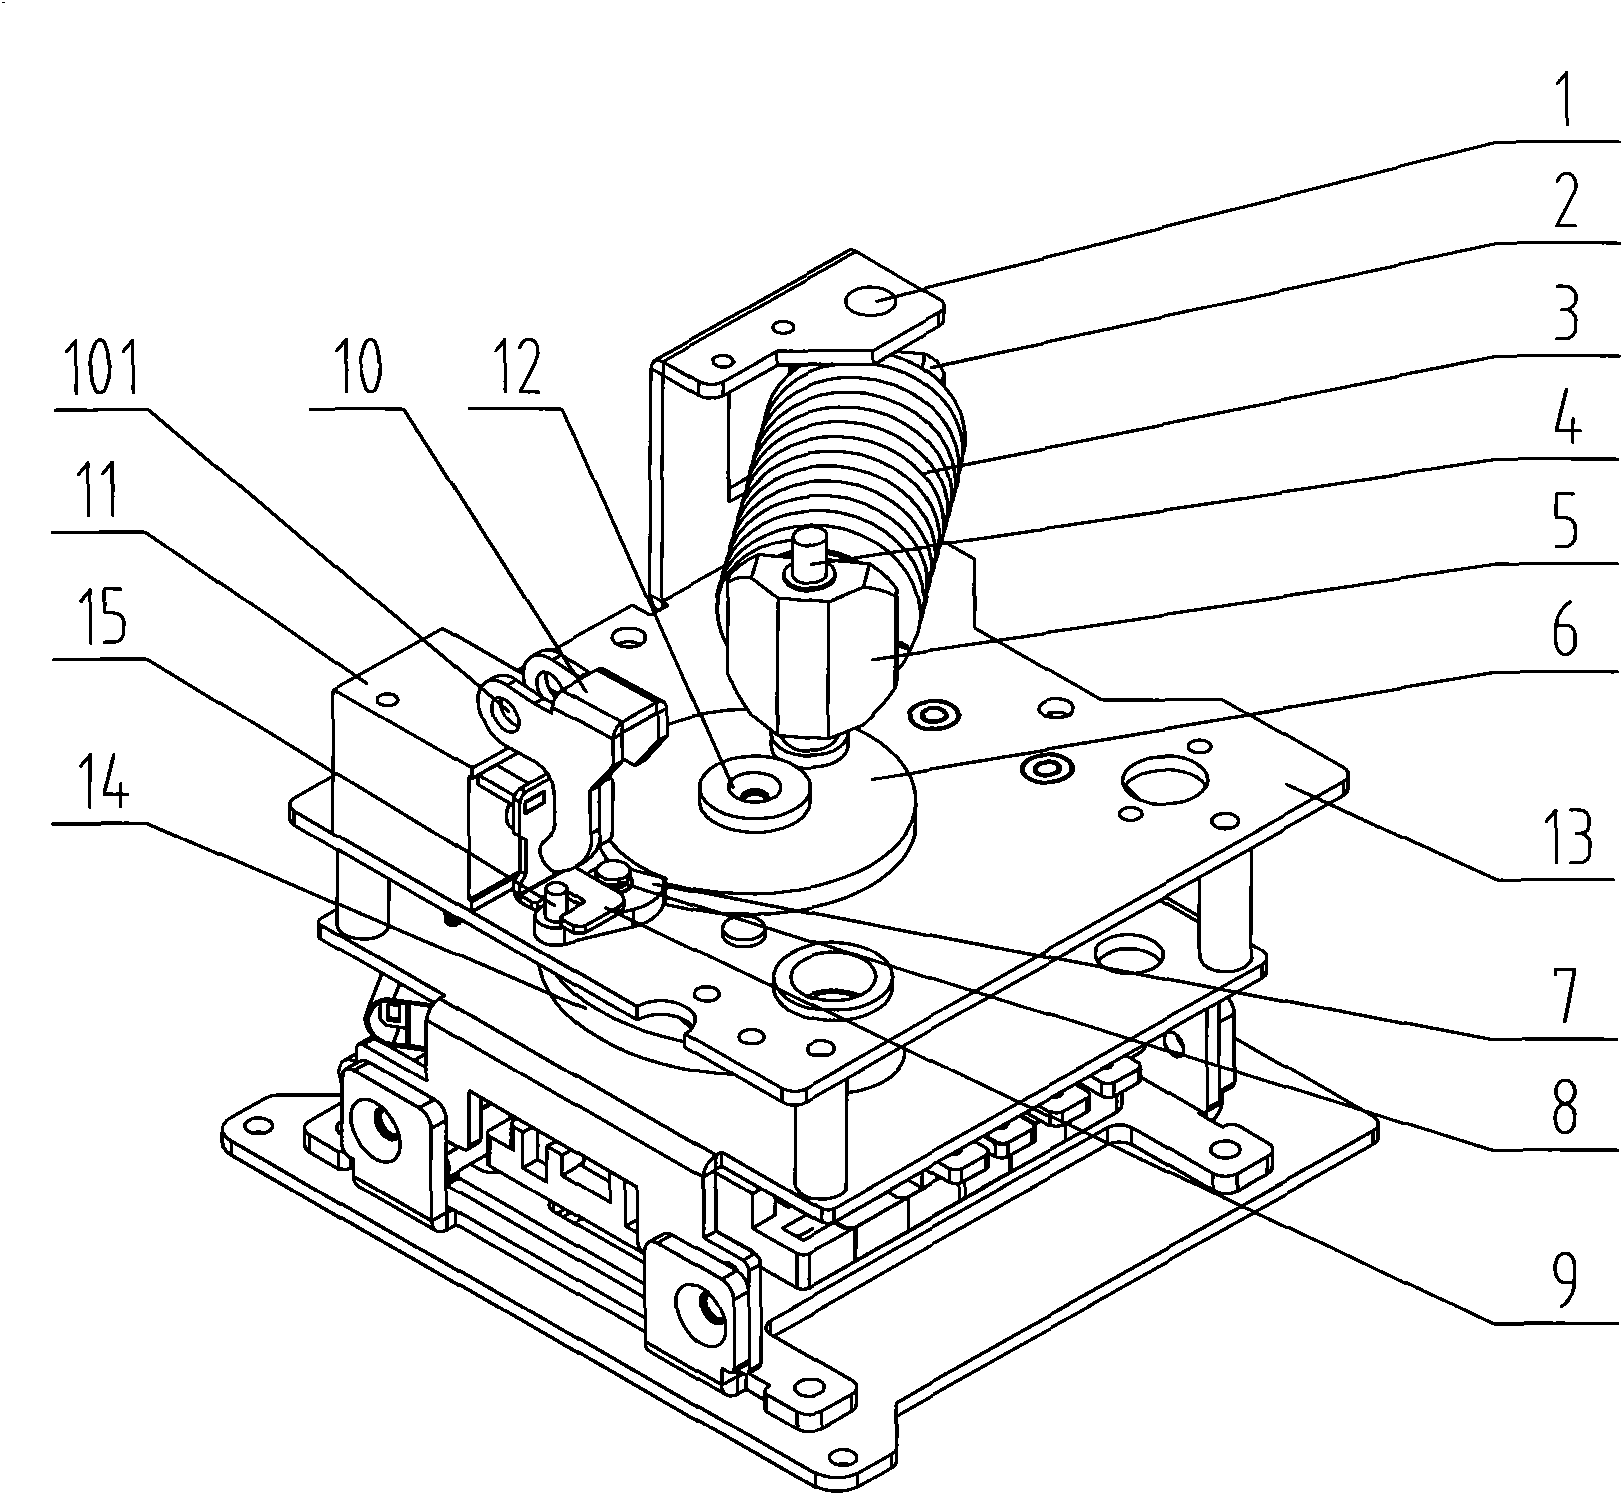 Energy-storing system of energy-storing electrically operated device